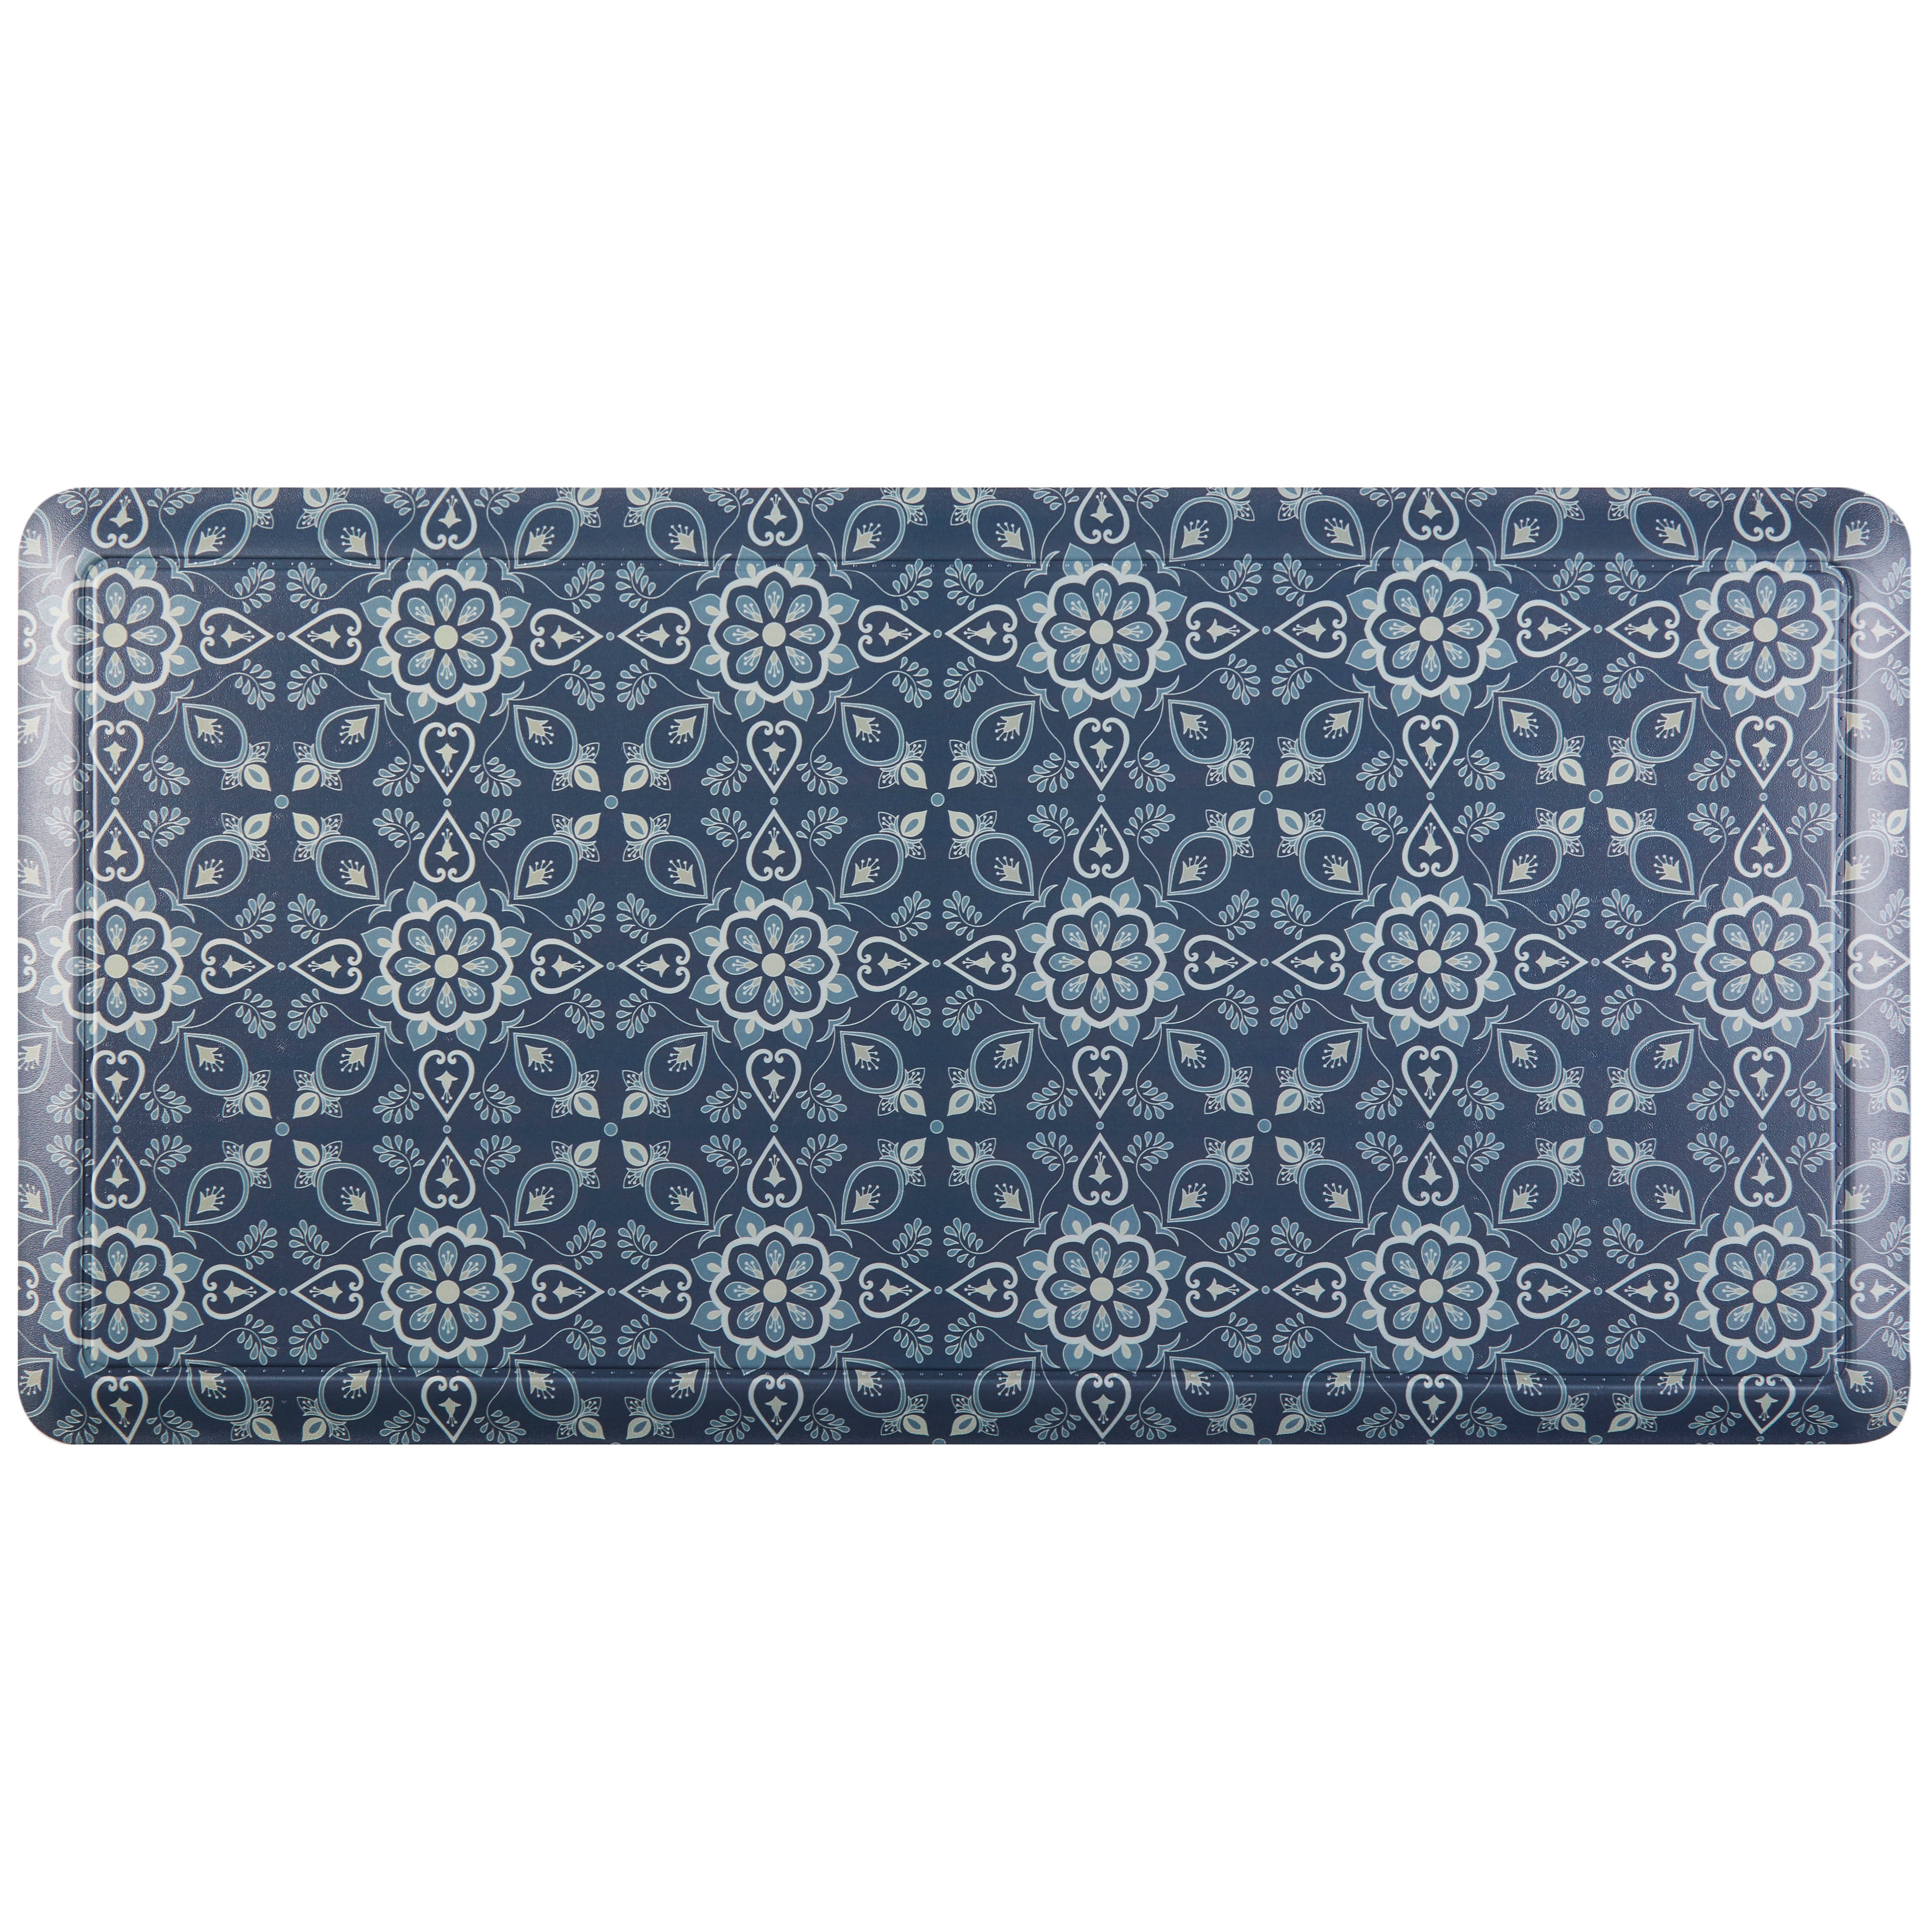 20" x 39" Oversized Cushioned Embossed Gentle Step Anti-Fatigue Kitchen Mat (Tile Blue) - Kitchen Mats - J&V Textiles Premiere Home Goods